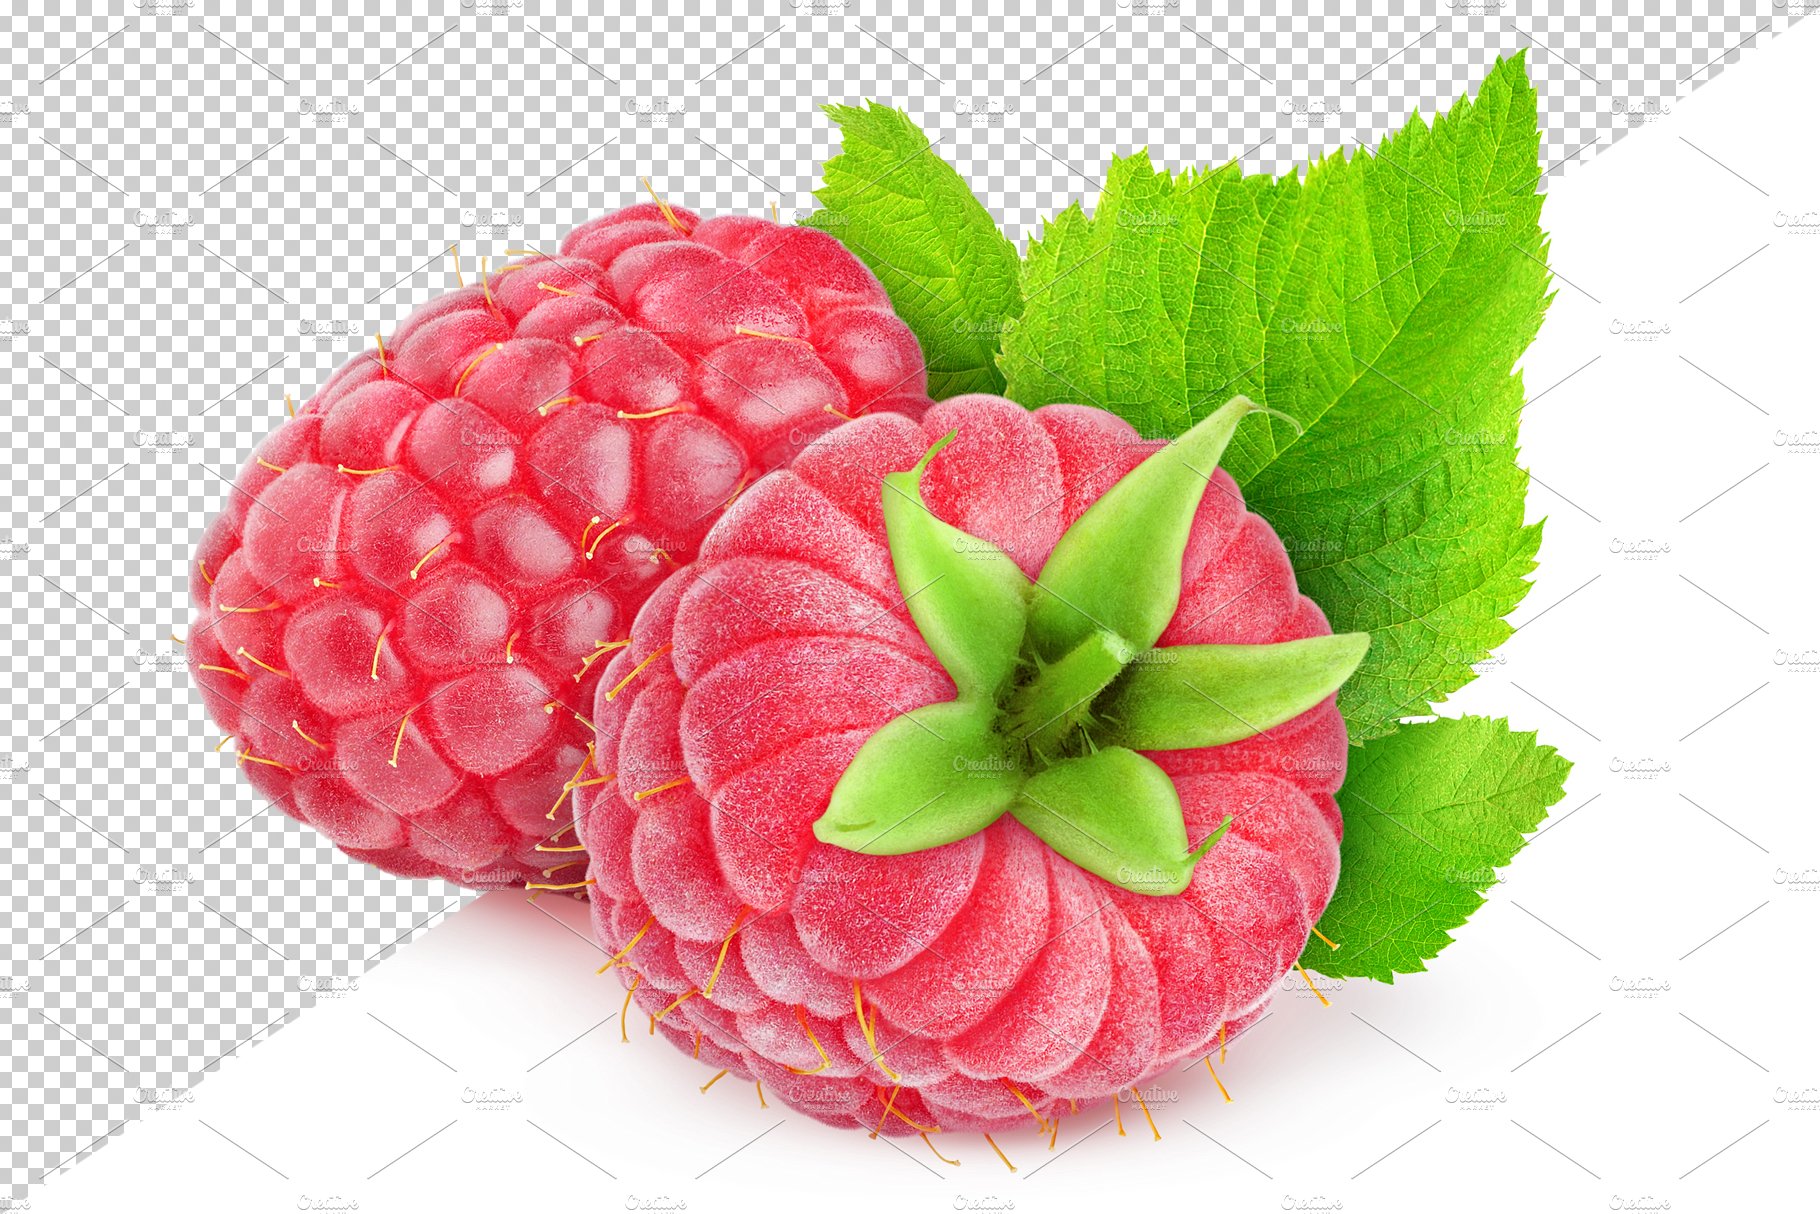 Two raspberries with leaf preview image.